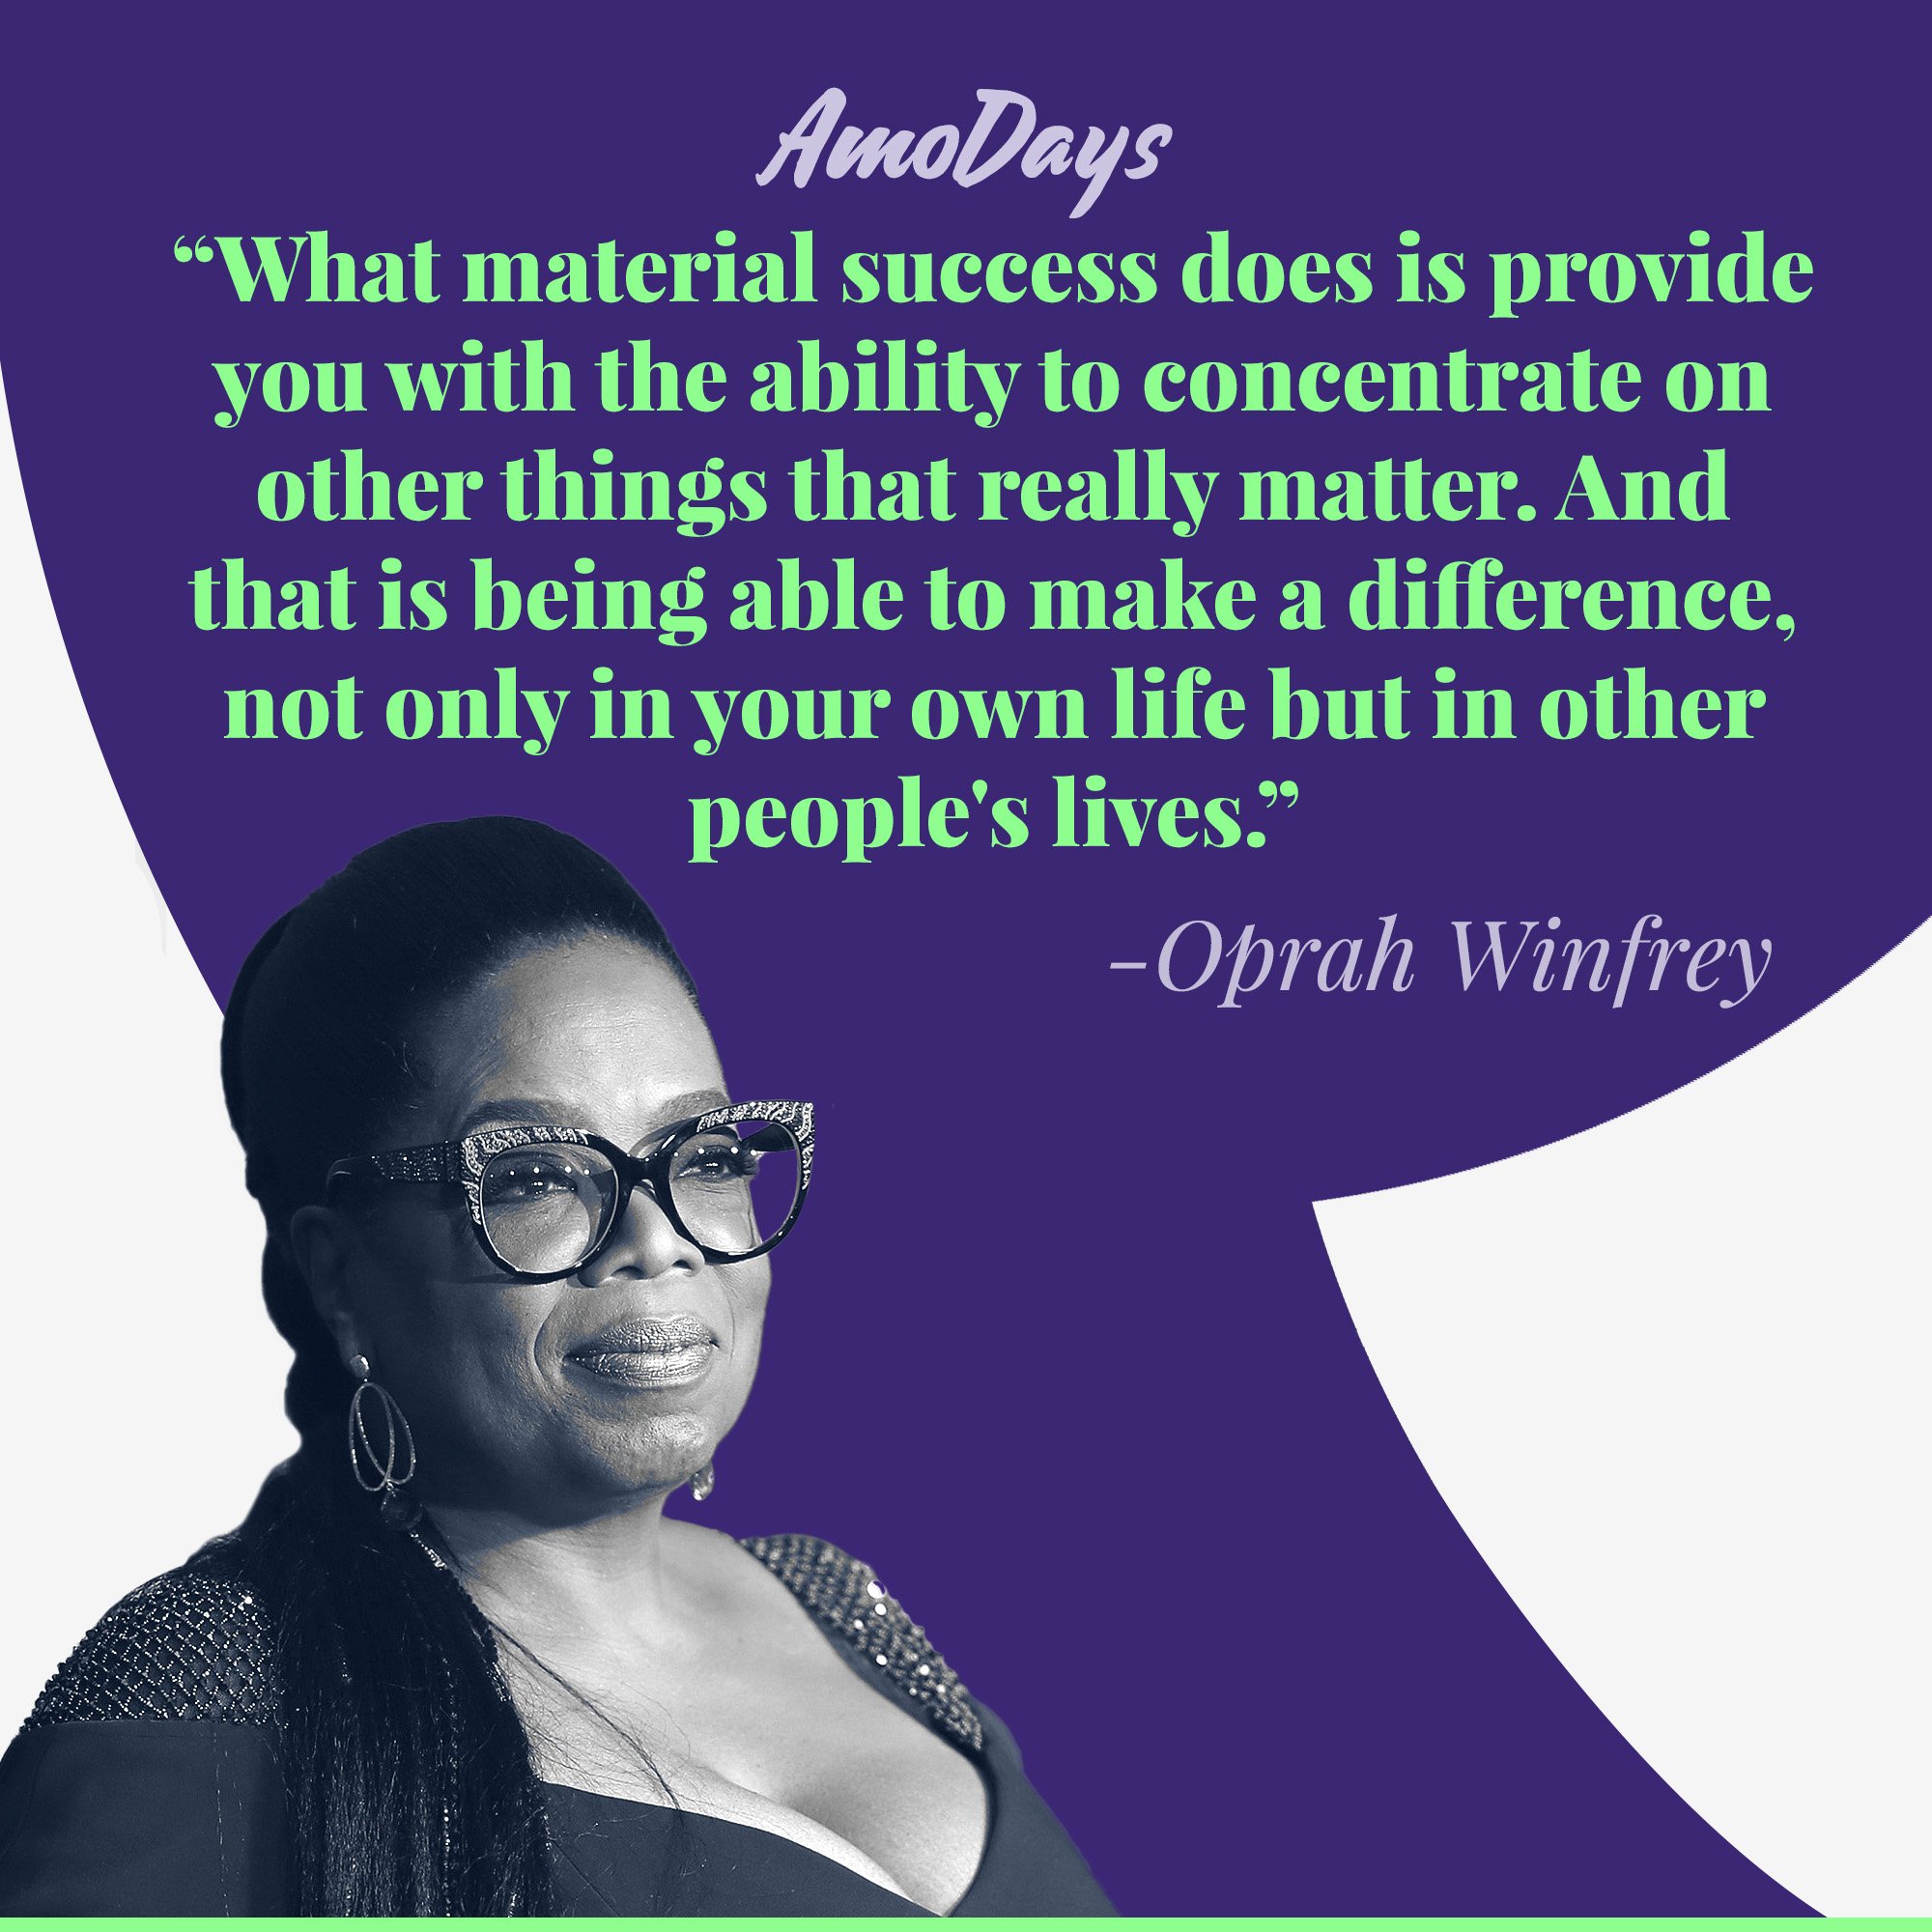 Oprah Winfrey's quote: "What material success does is provide you with the ability to concentrate on other things that really matter. And that is being able to make a difference, not only in your own life but in other people's lives." | Image: AmoDays